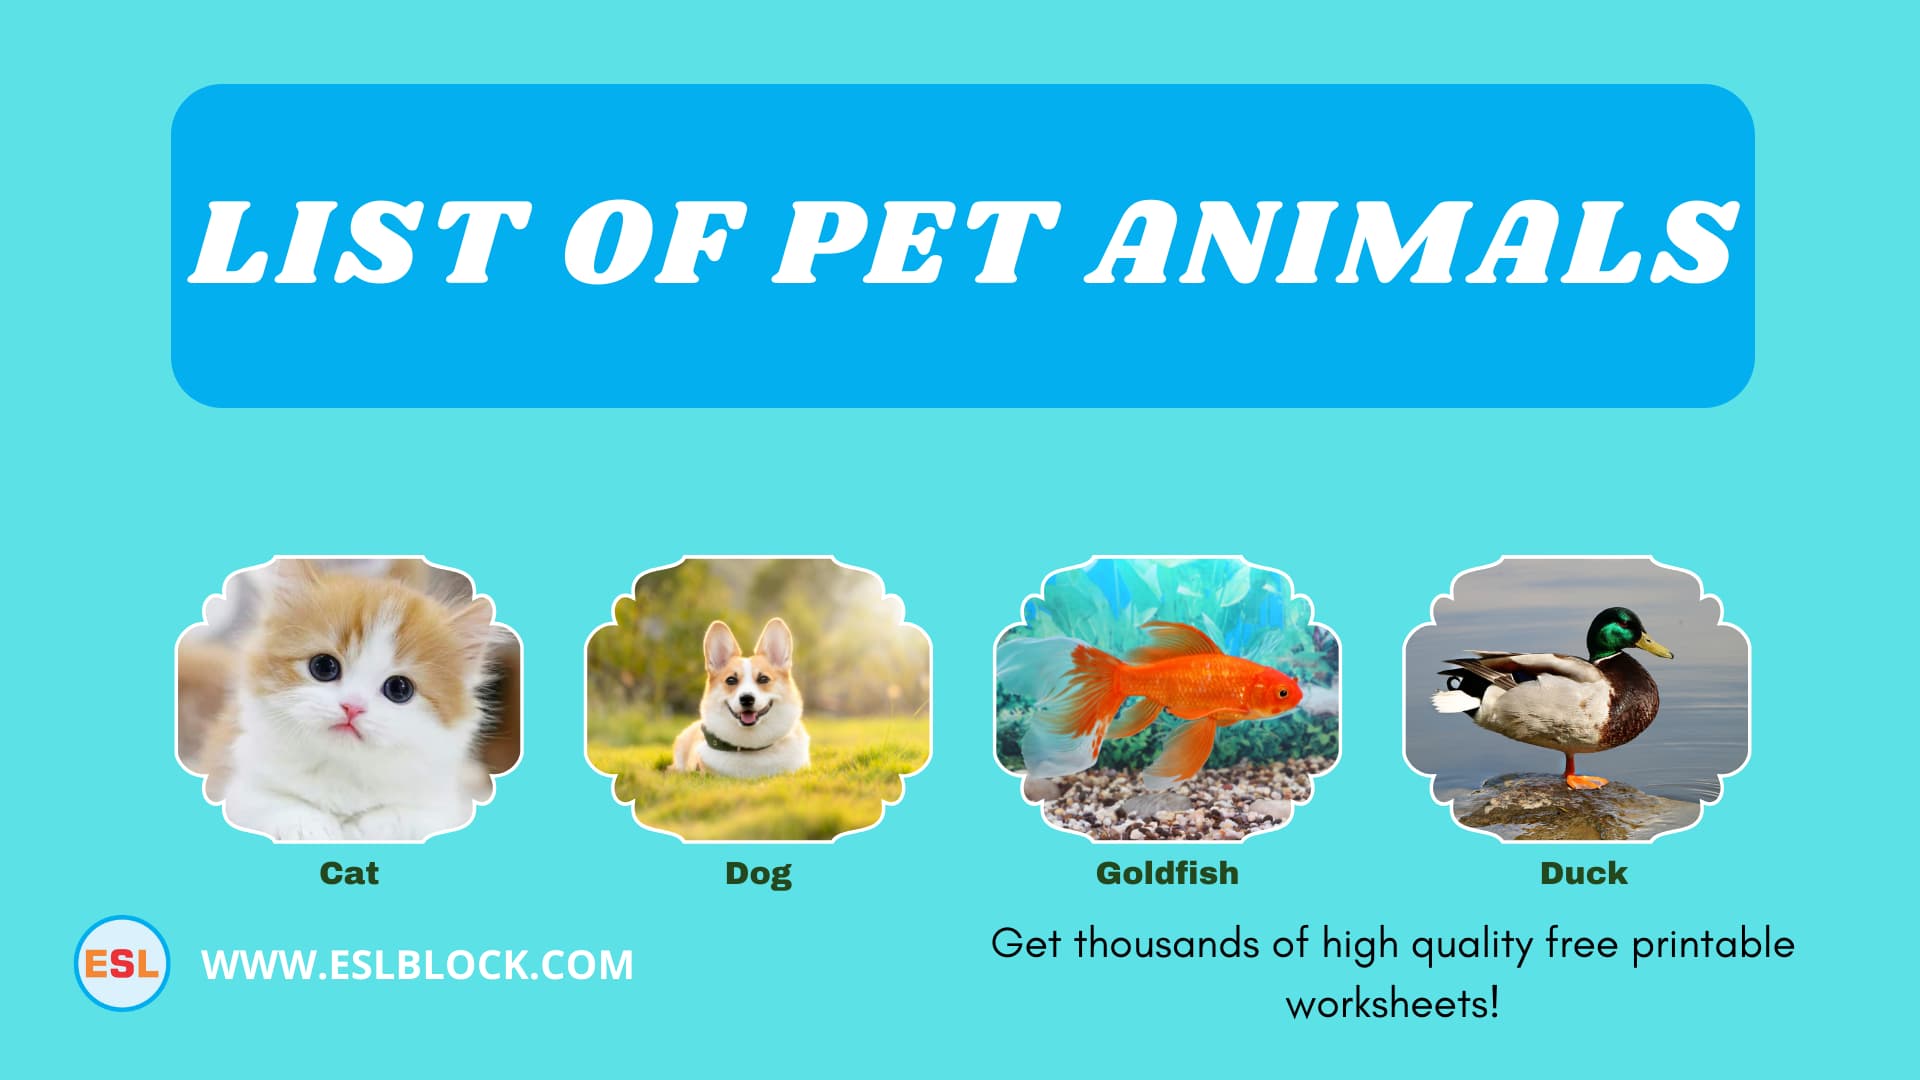 Animals Names, Best pet animals, Big pets, Cute pets, Different Types of pets, English, English Nouns, English Vocabulary, English Words, List of cute pets, Medium pet animals, Nouns, Pet animals, Pets List, Small pets, Vocabulary